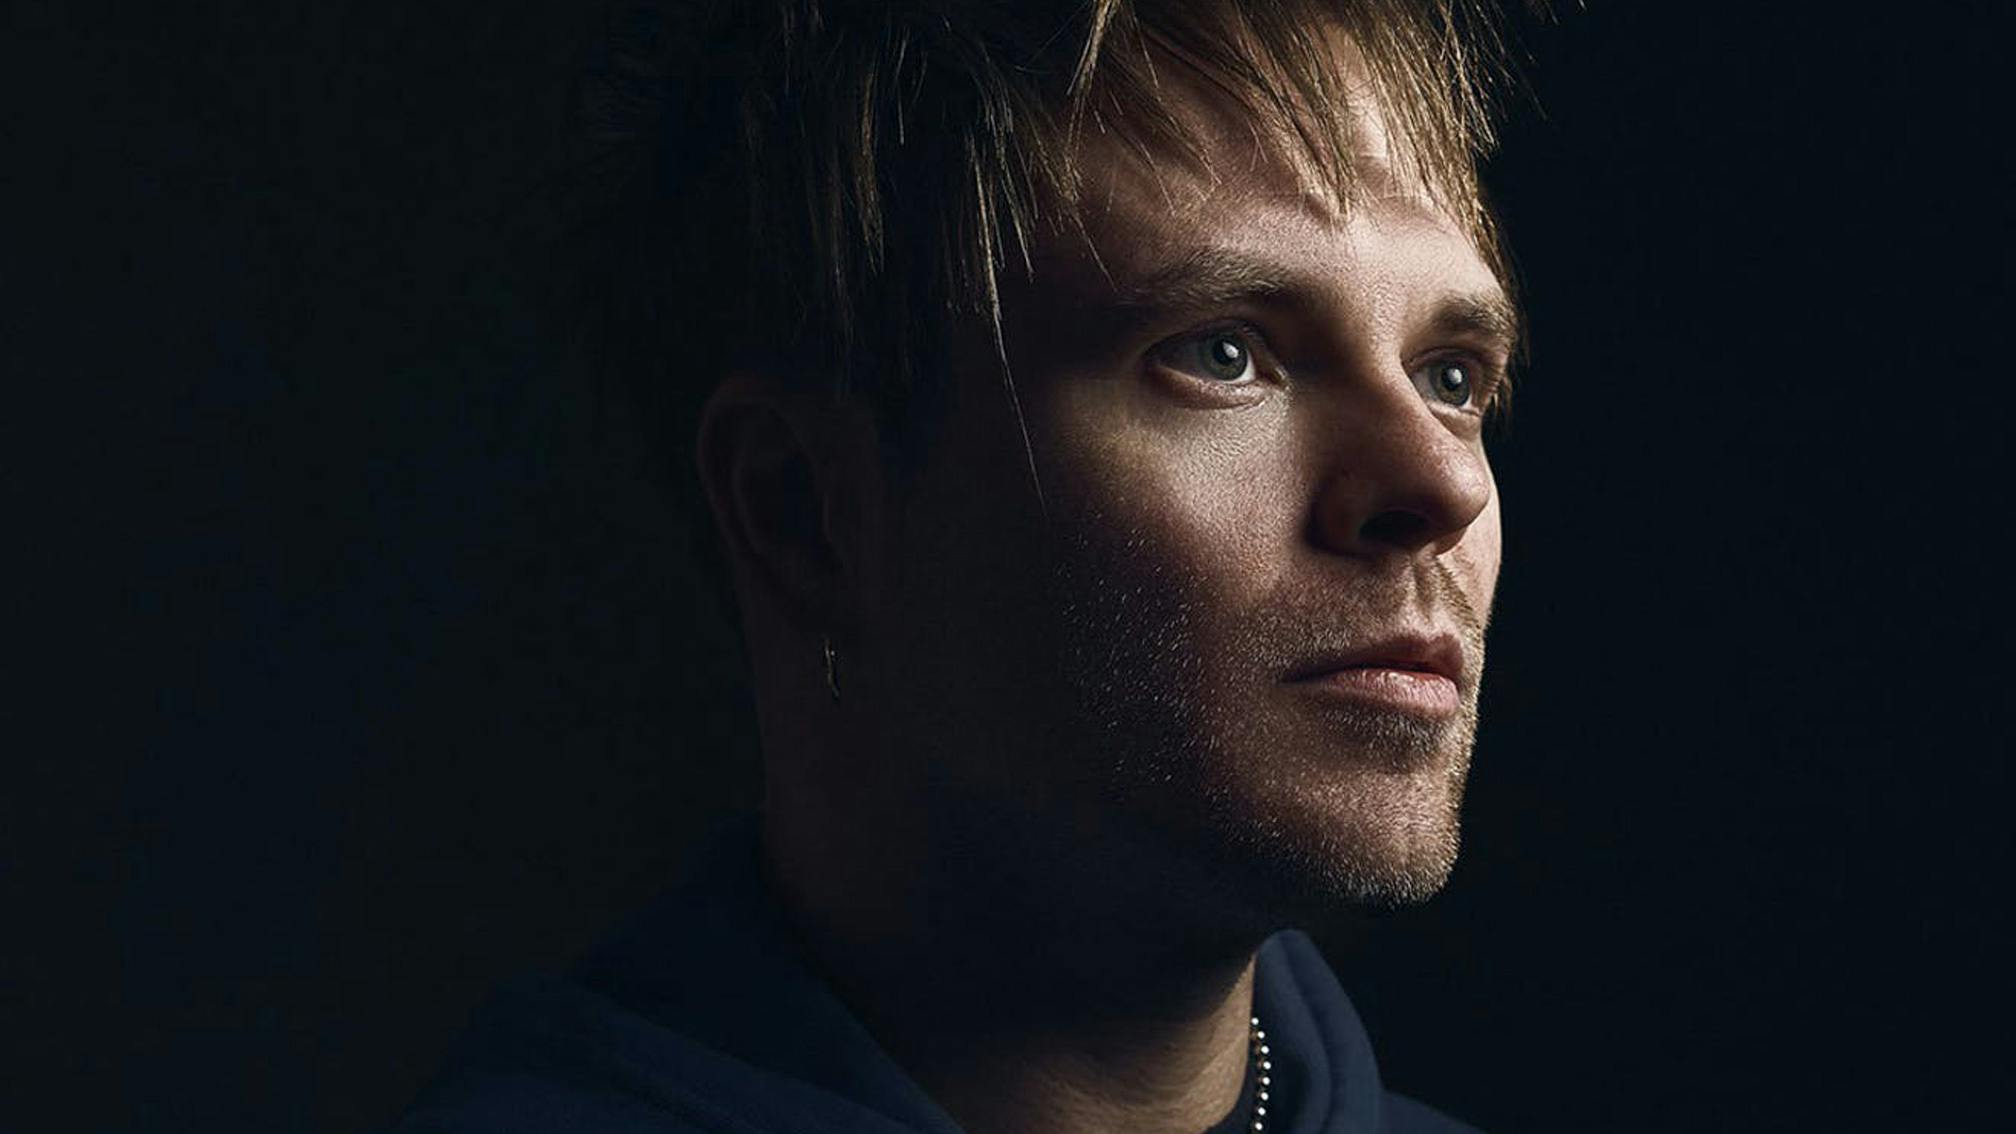 Rou Reynolds: “Essentially we’ve experienced the death of Enter Shikari to some degree”